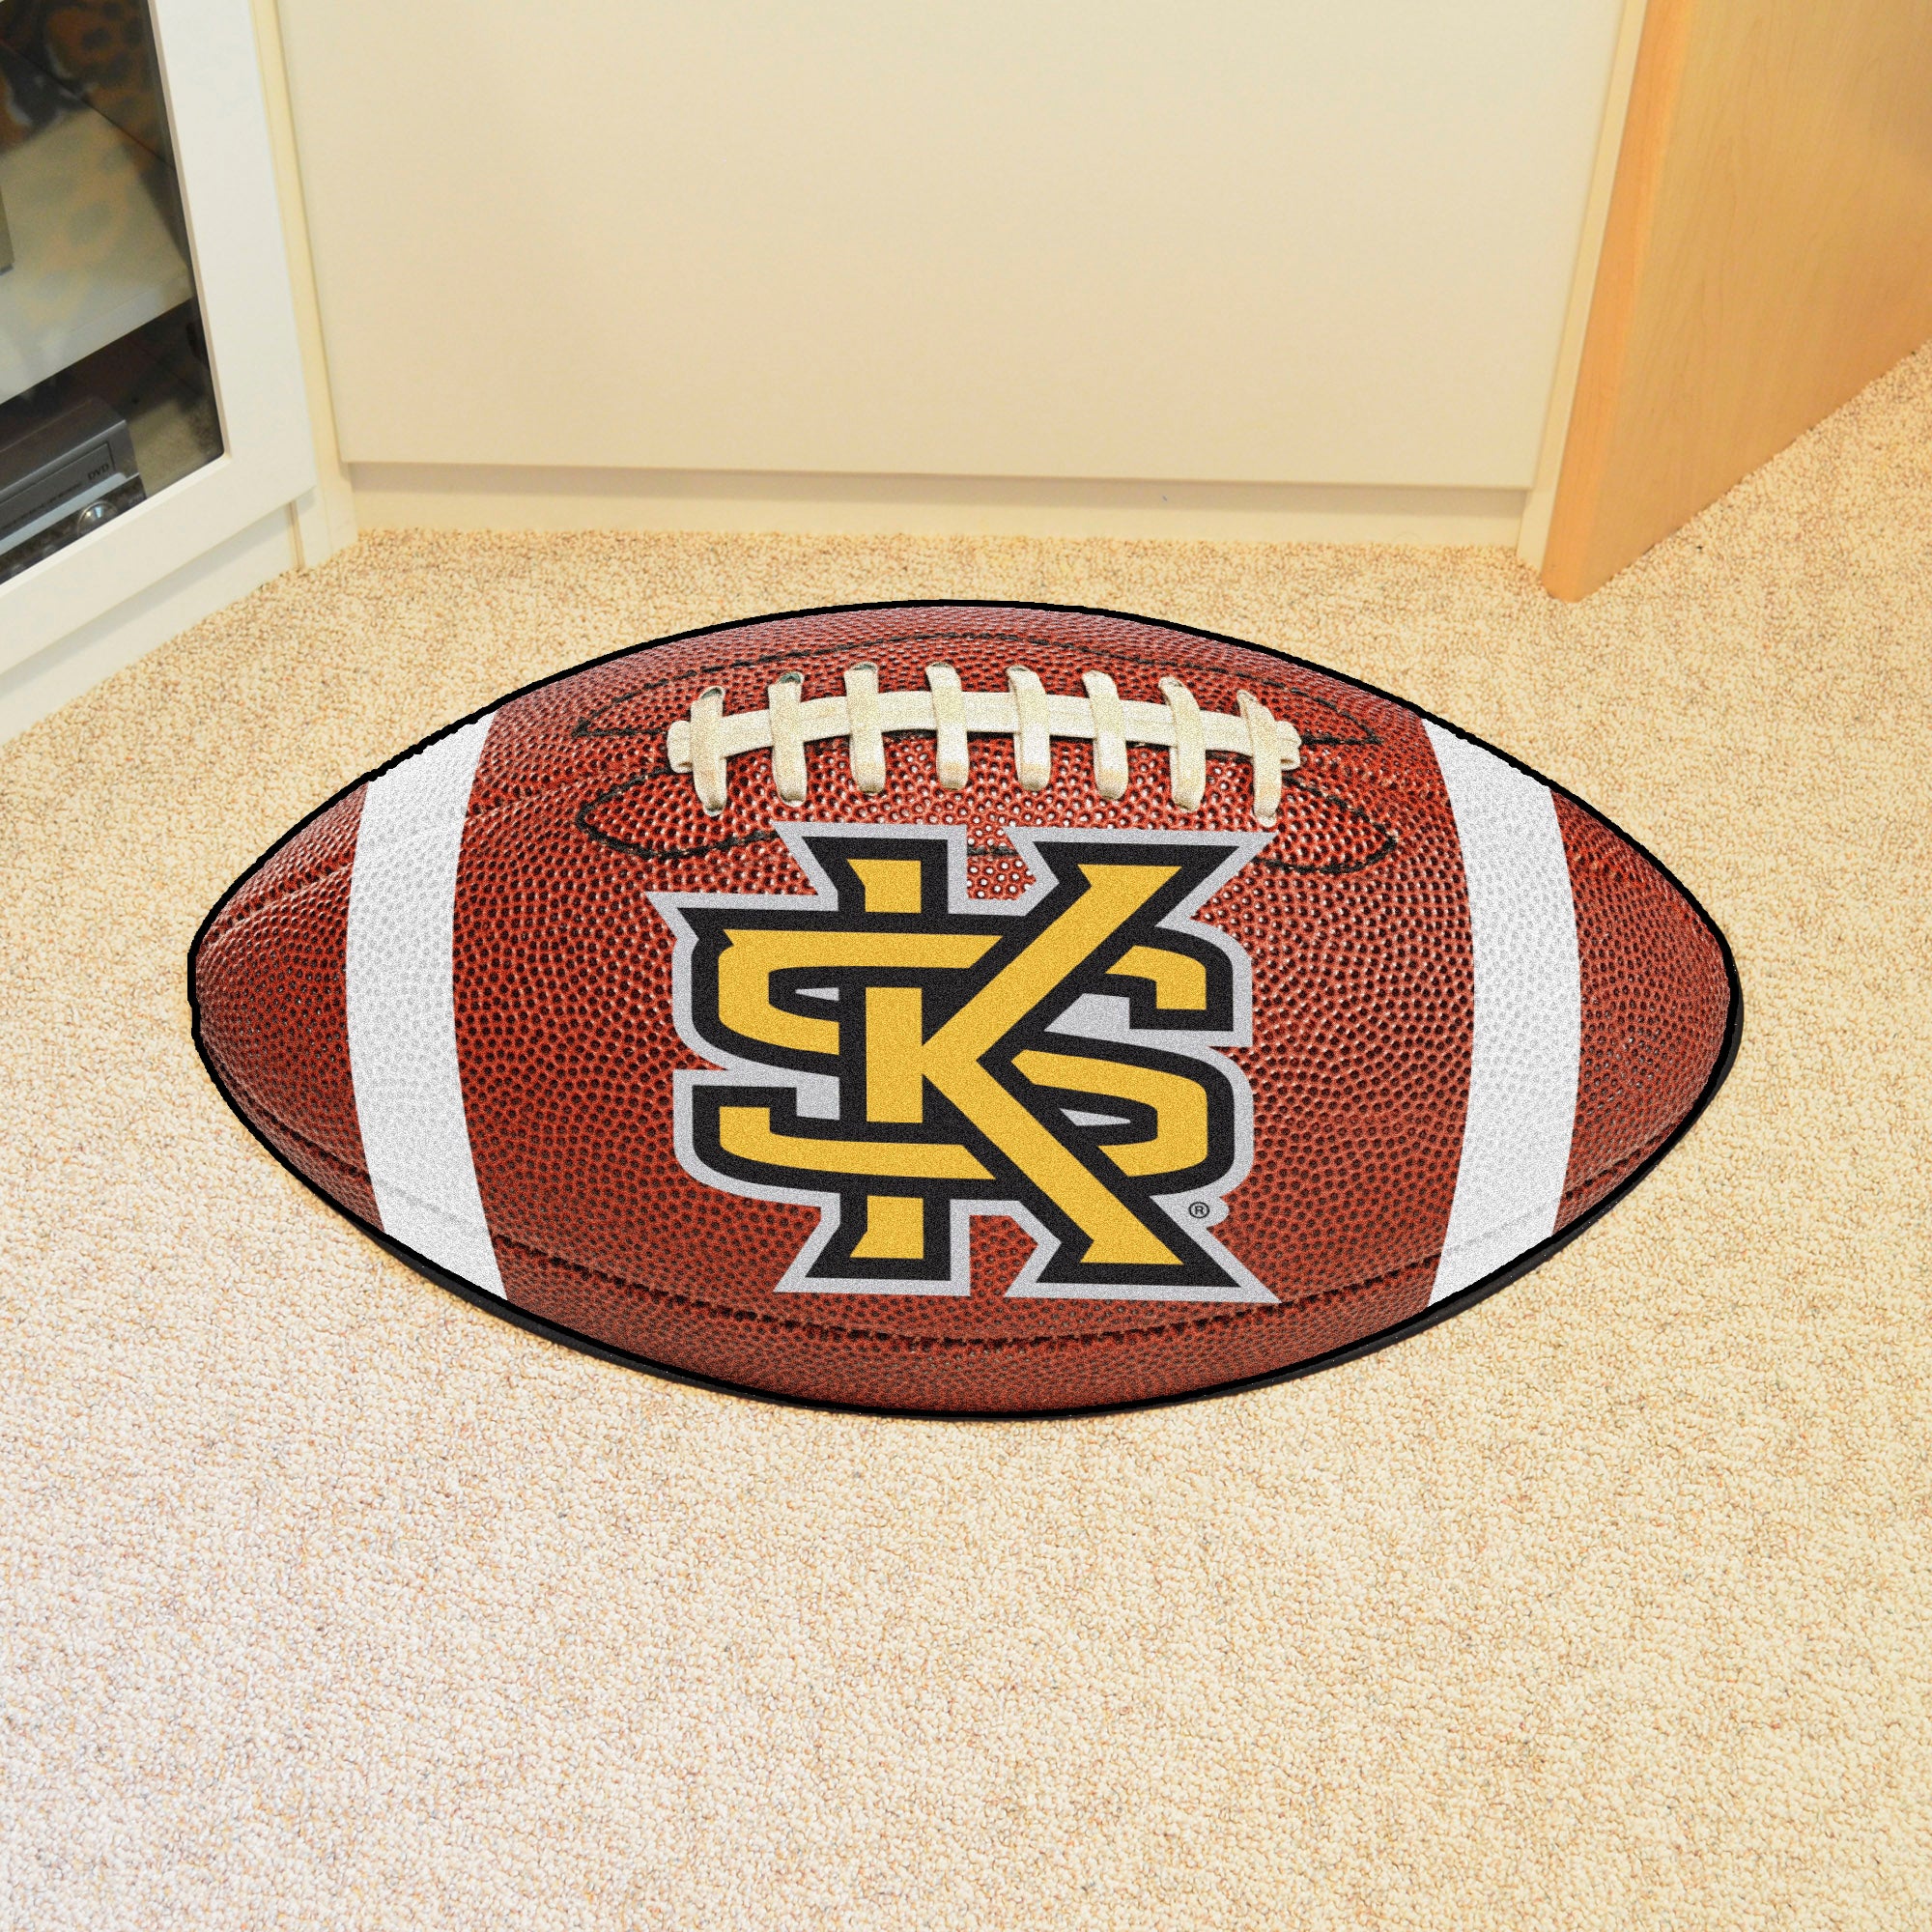 FANMATS, Kennesaw State University Football Rug - 20.5in. x 32.5in.